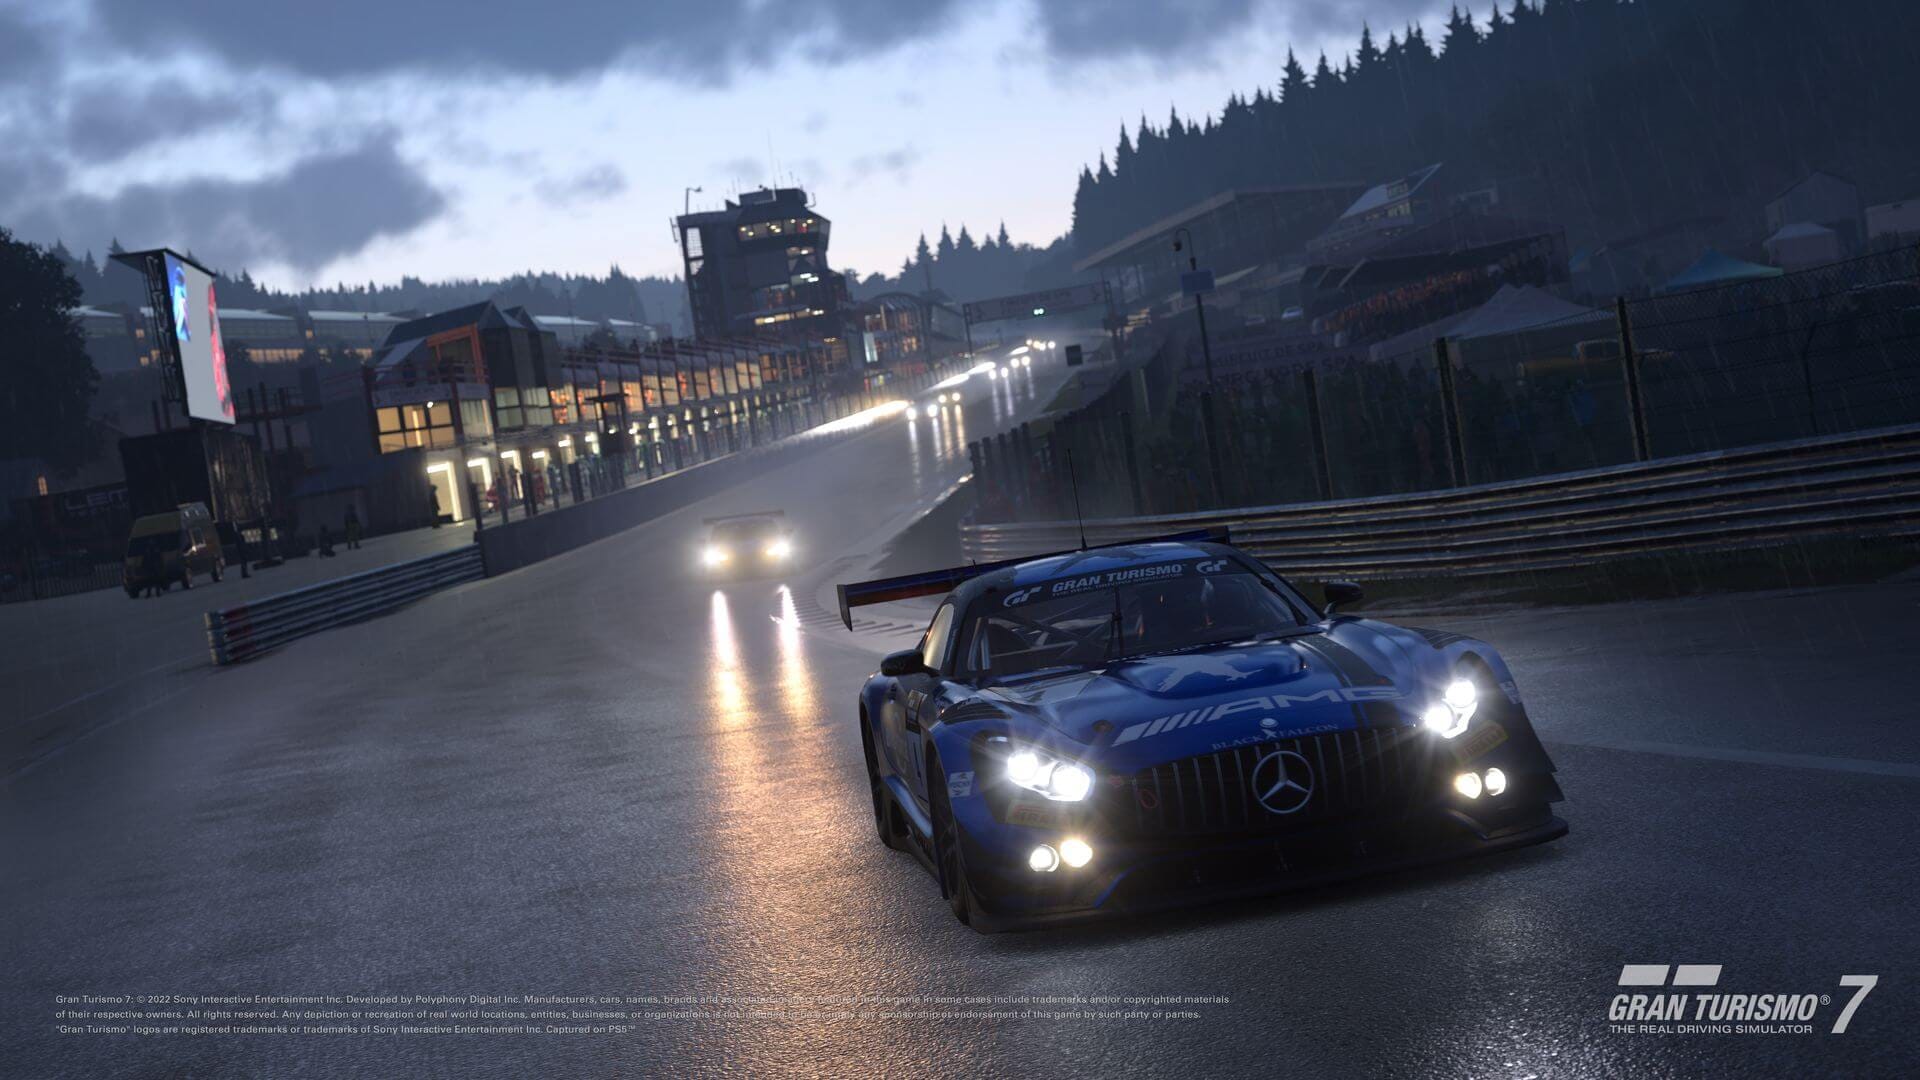 Gran Turismo 7 Update 1.39 Out Now, Patch Notes